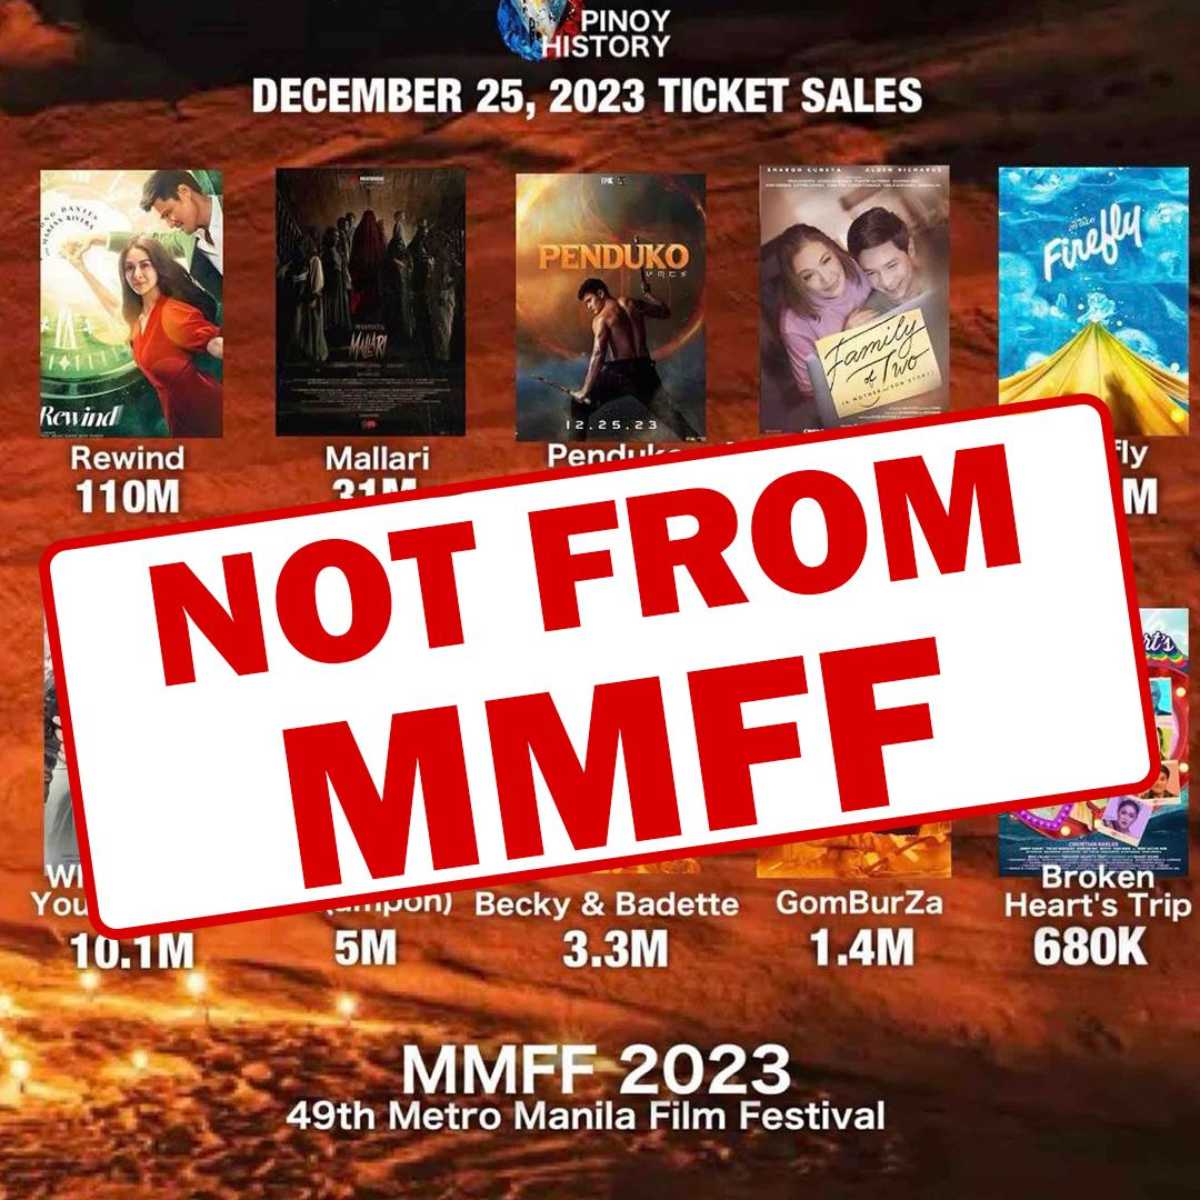 The MMFF does not release or publish any kind of rankings